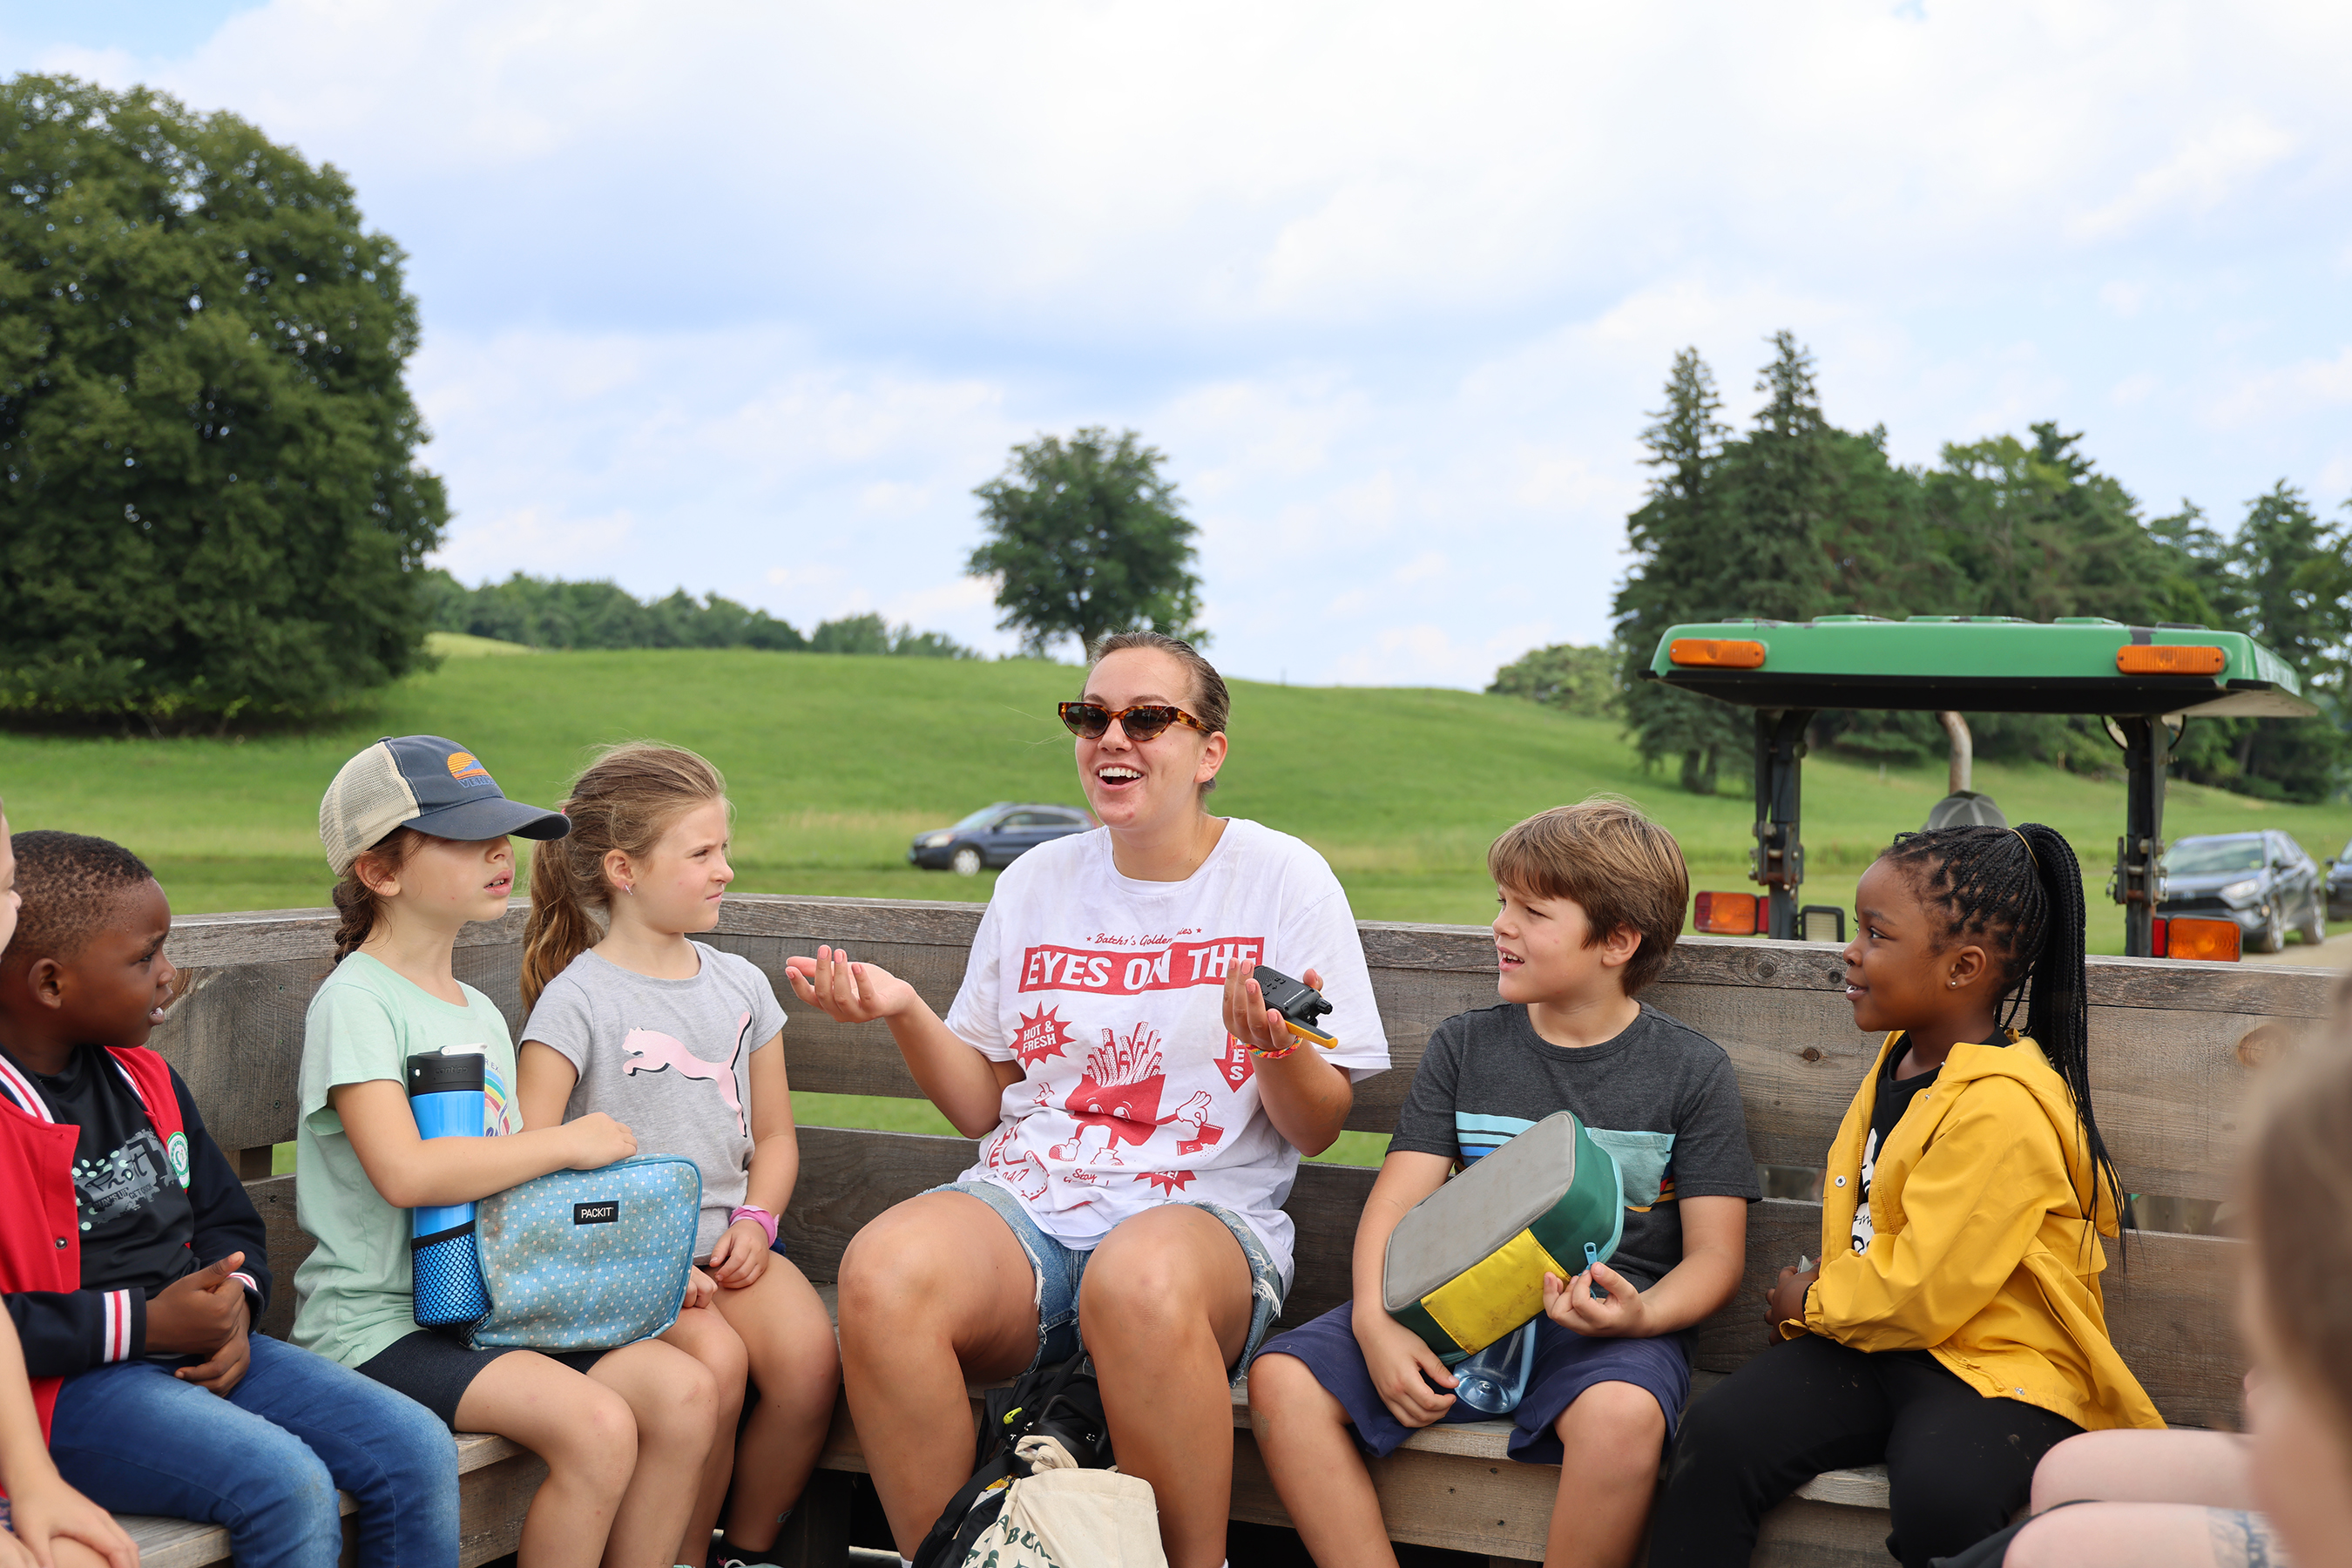 A woman rides in the a tractor pulled wagon with a dozen young summer campers on a farm